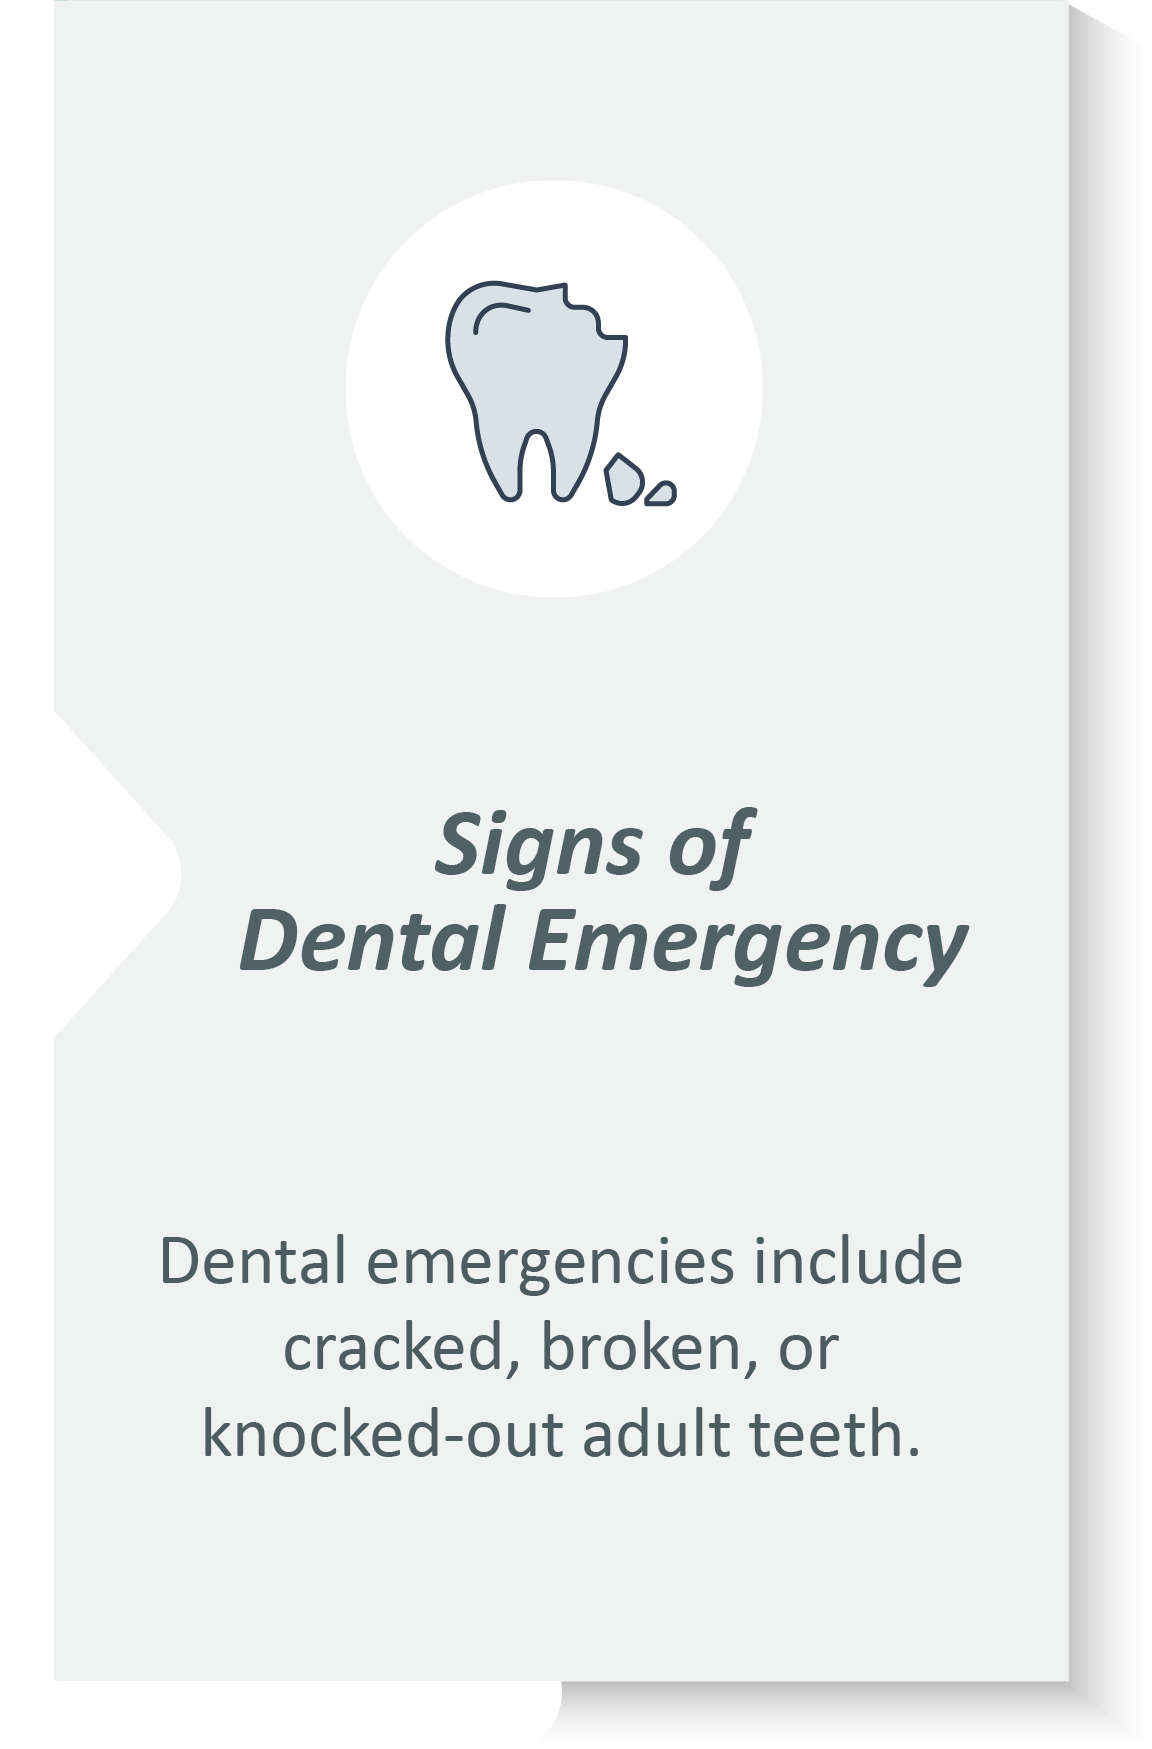 Emergency dentist infographic: Dental emergencies include cracked, broken, or knocked-out adult teeth.